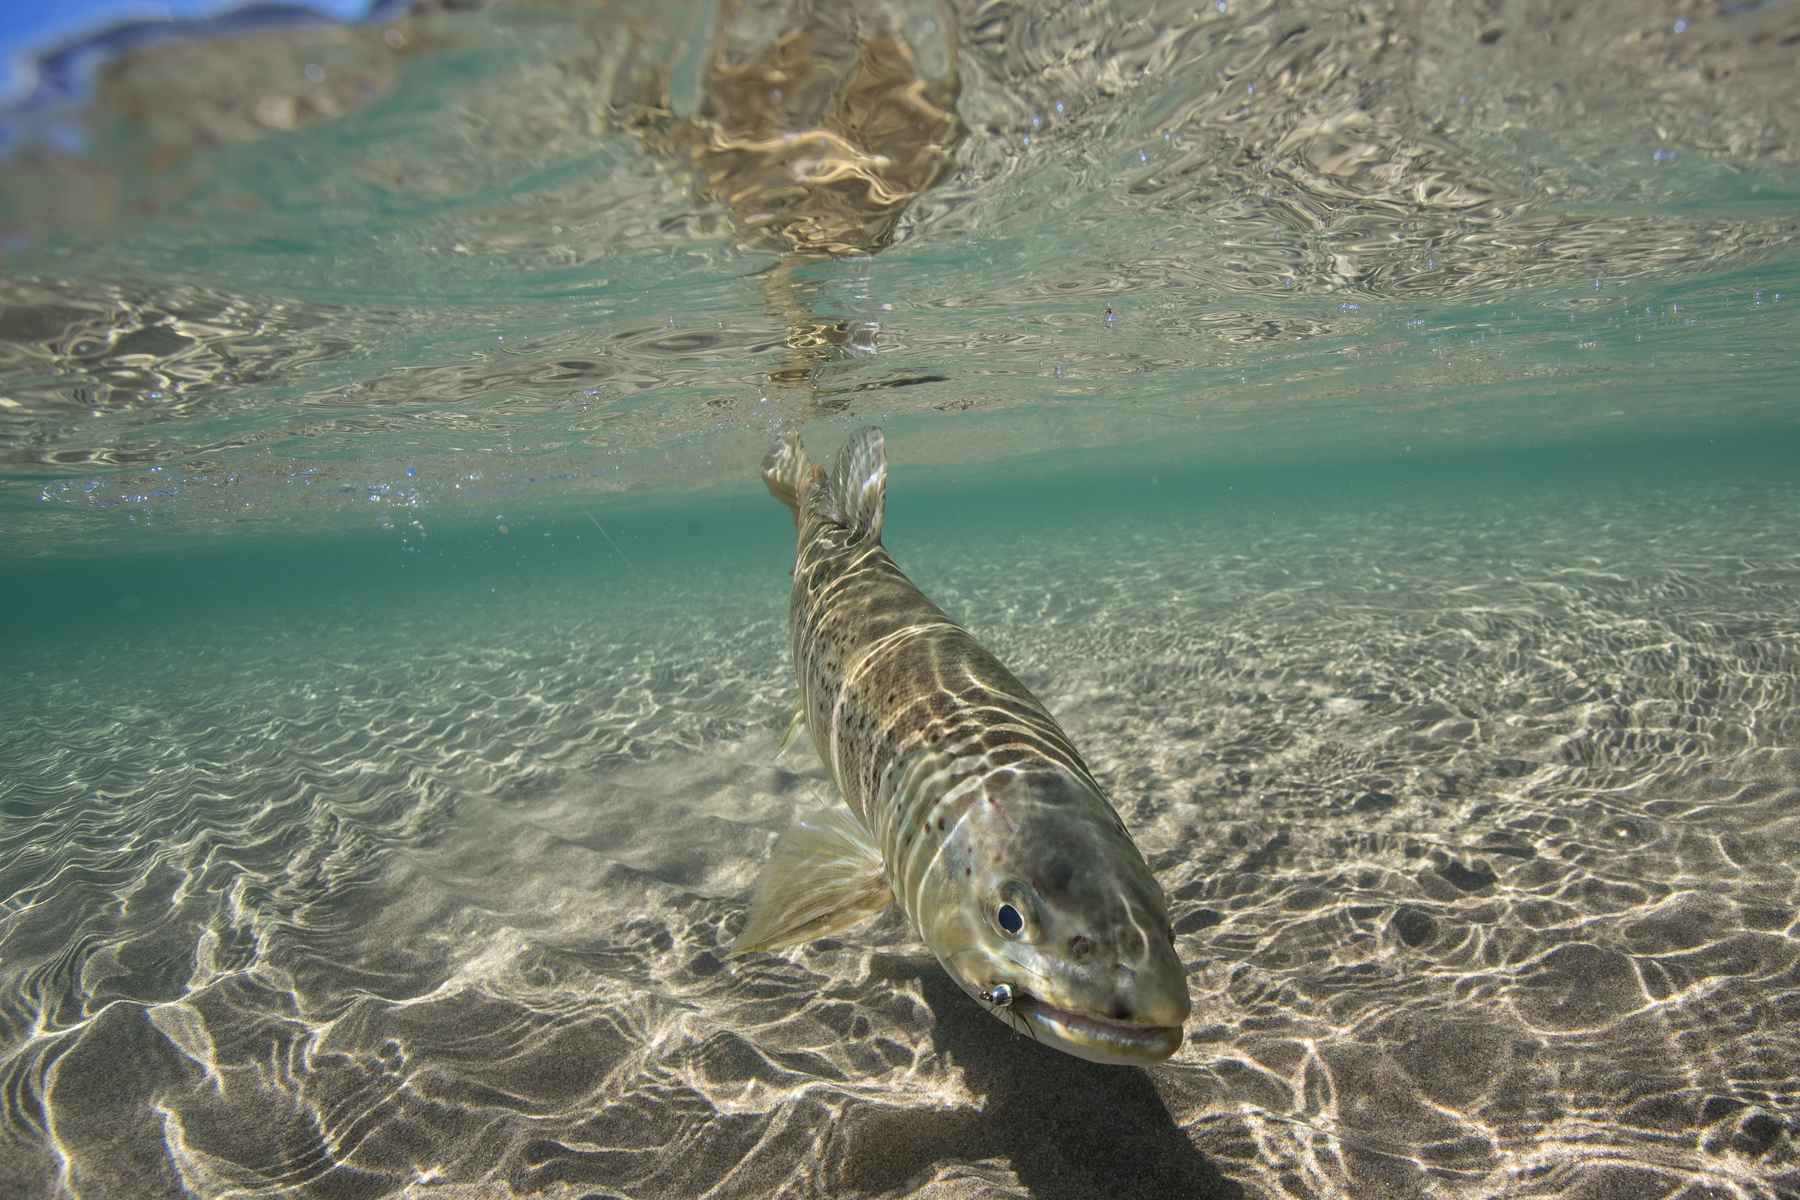 Flatlining in the Andes  Hatch Magazine - Fly Fishing, etc.